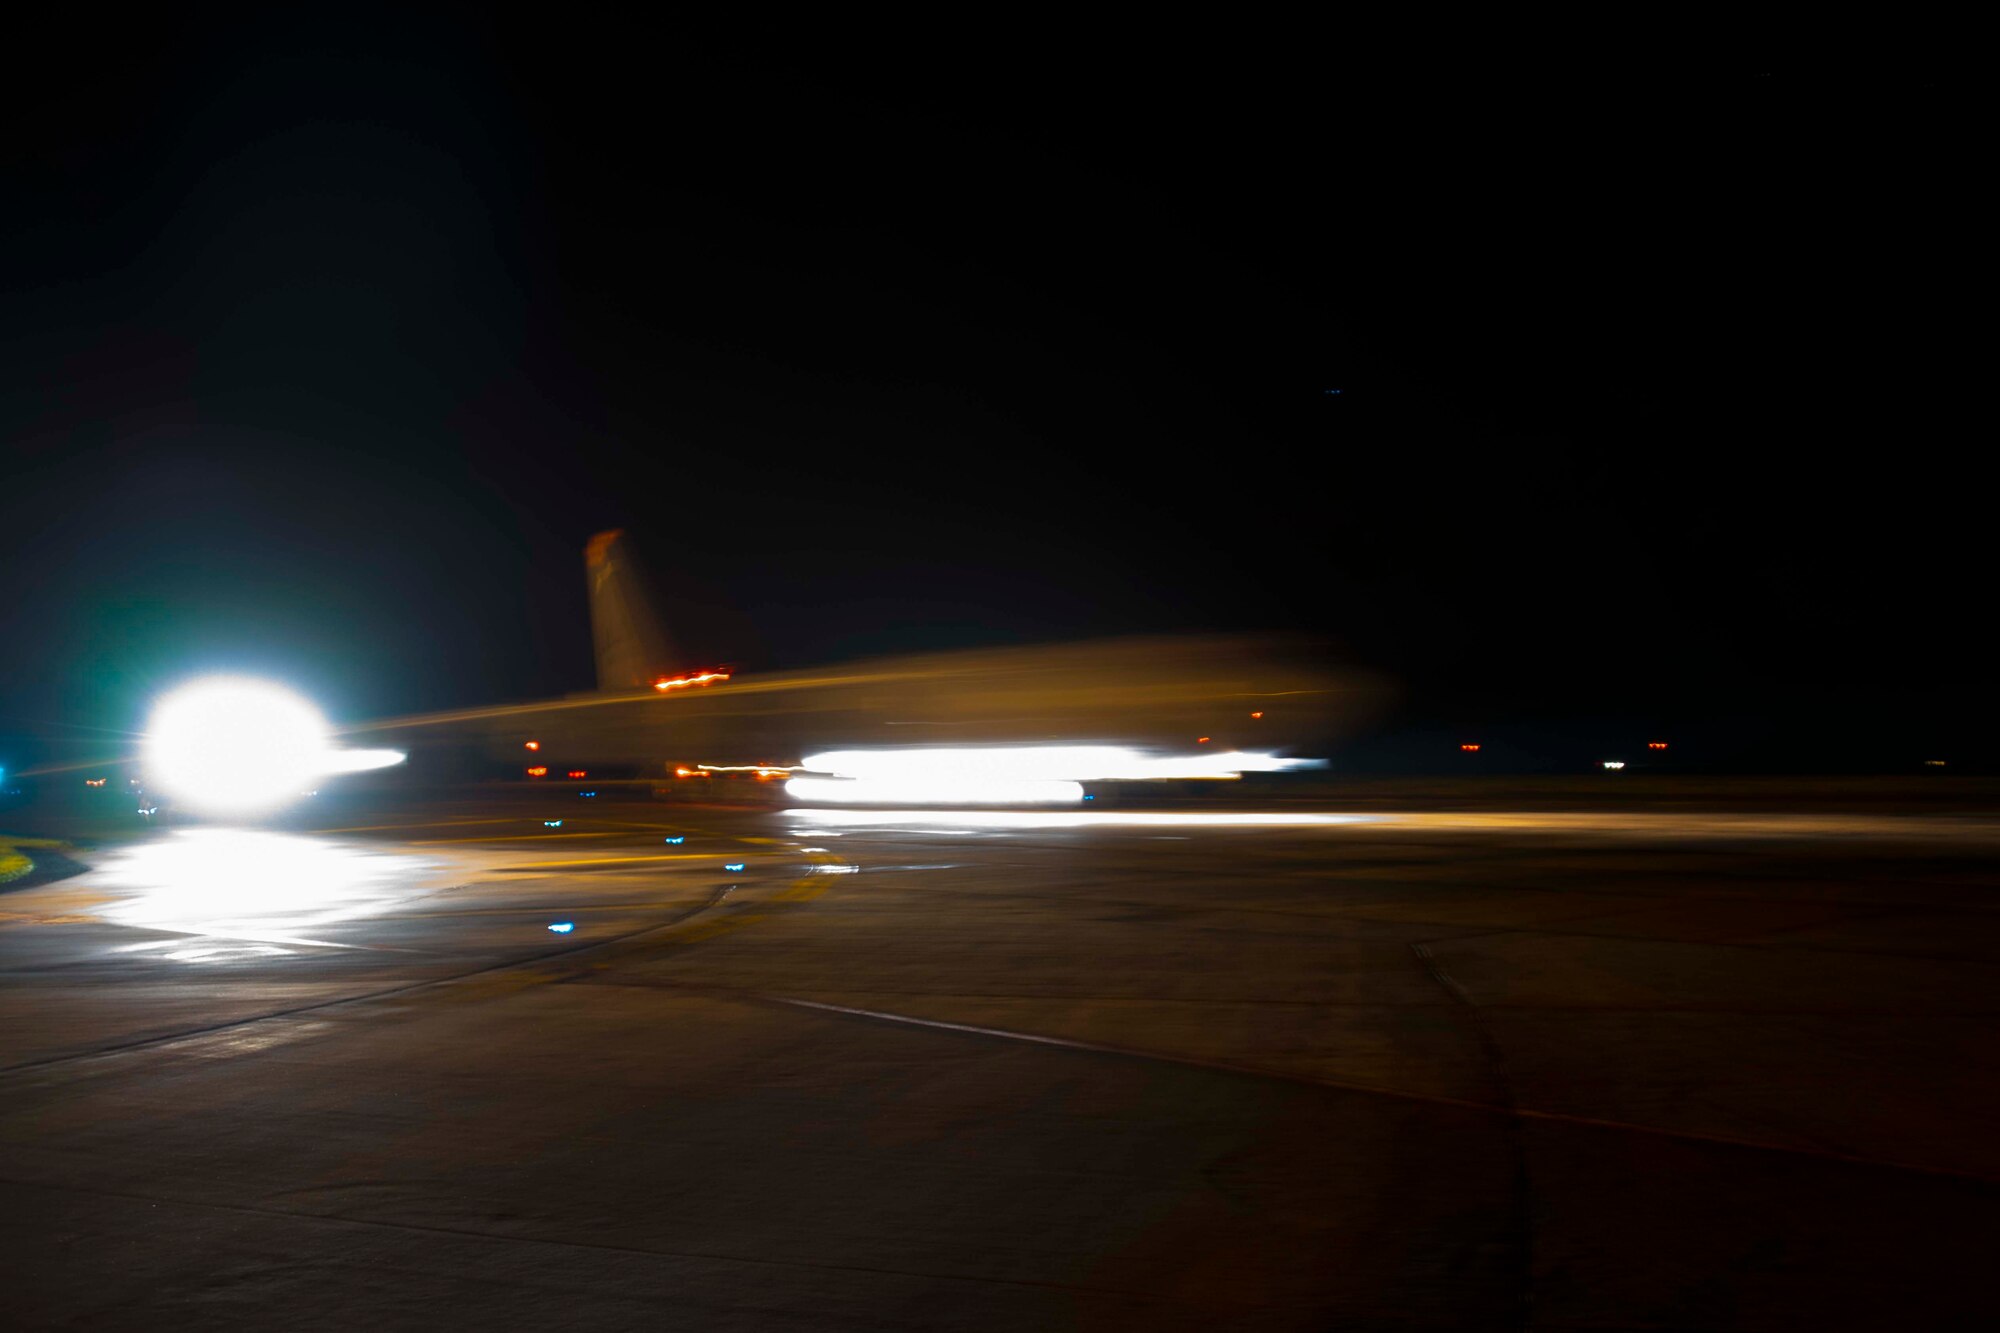 A B-52 Stratofortress heads to the runway prior for an early morning sortie Sept. 19, 2018 at RAF Fairford, England.  Four Air Force Reserve units and one active duty unit came together to launch multiple sorties from the base for Ample Strike 18 and as part of the Bomber Task Force rotation in Europe. (U.S. Air Force photo by Master Sgt. Ted Daigle)